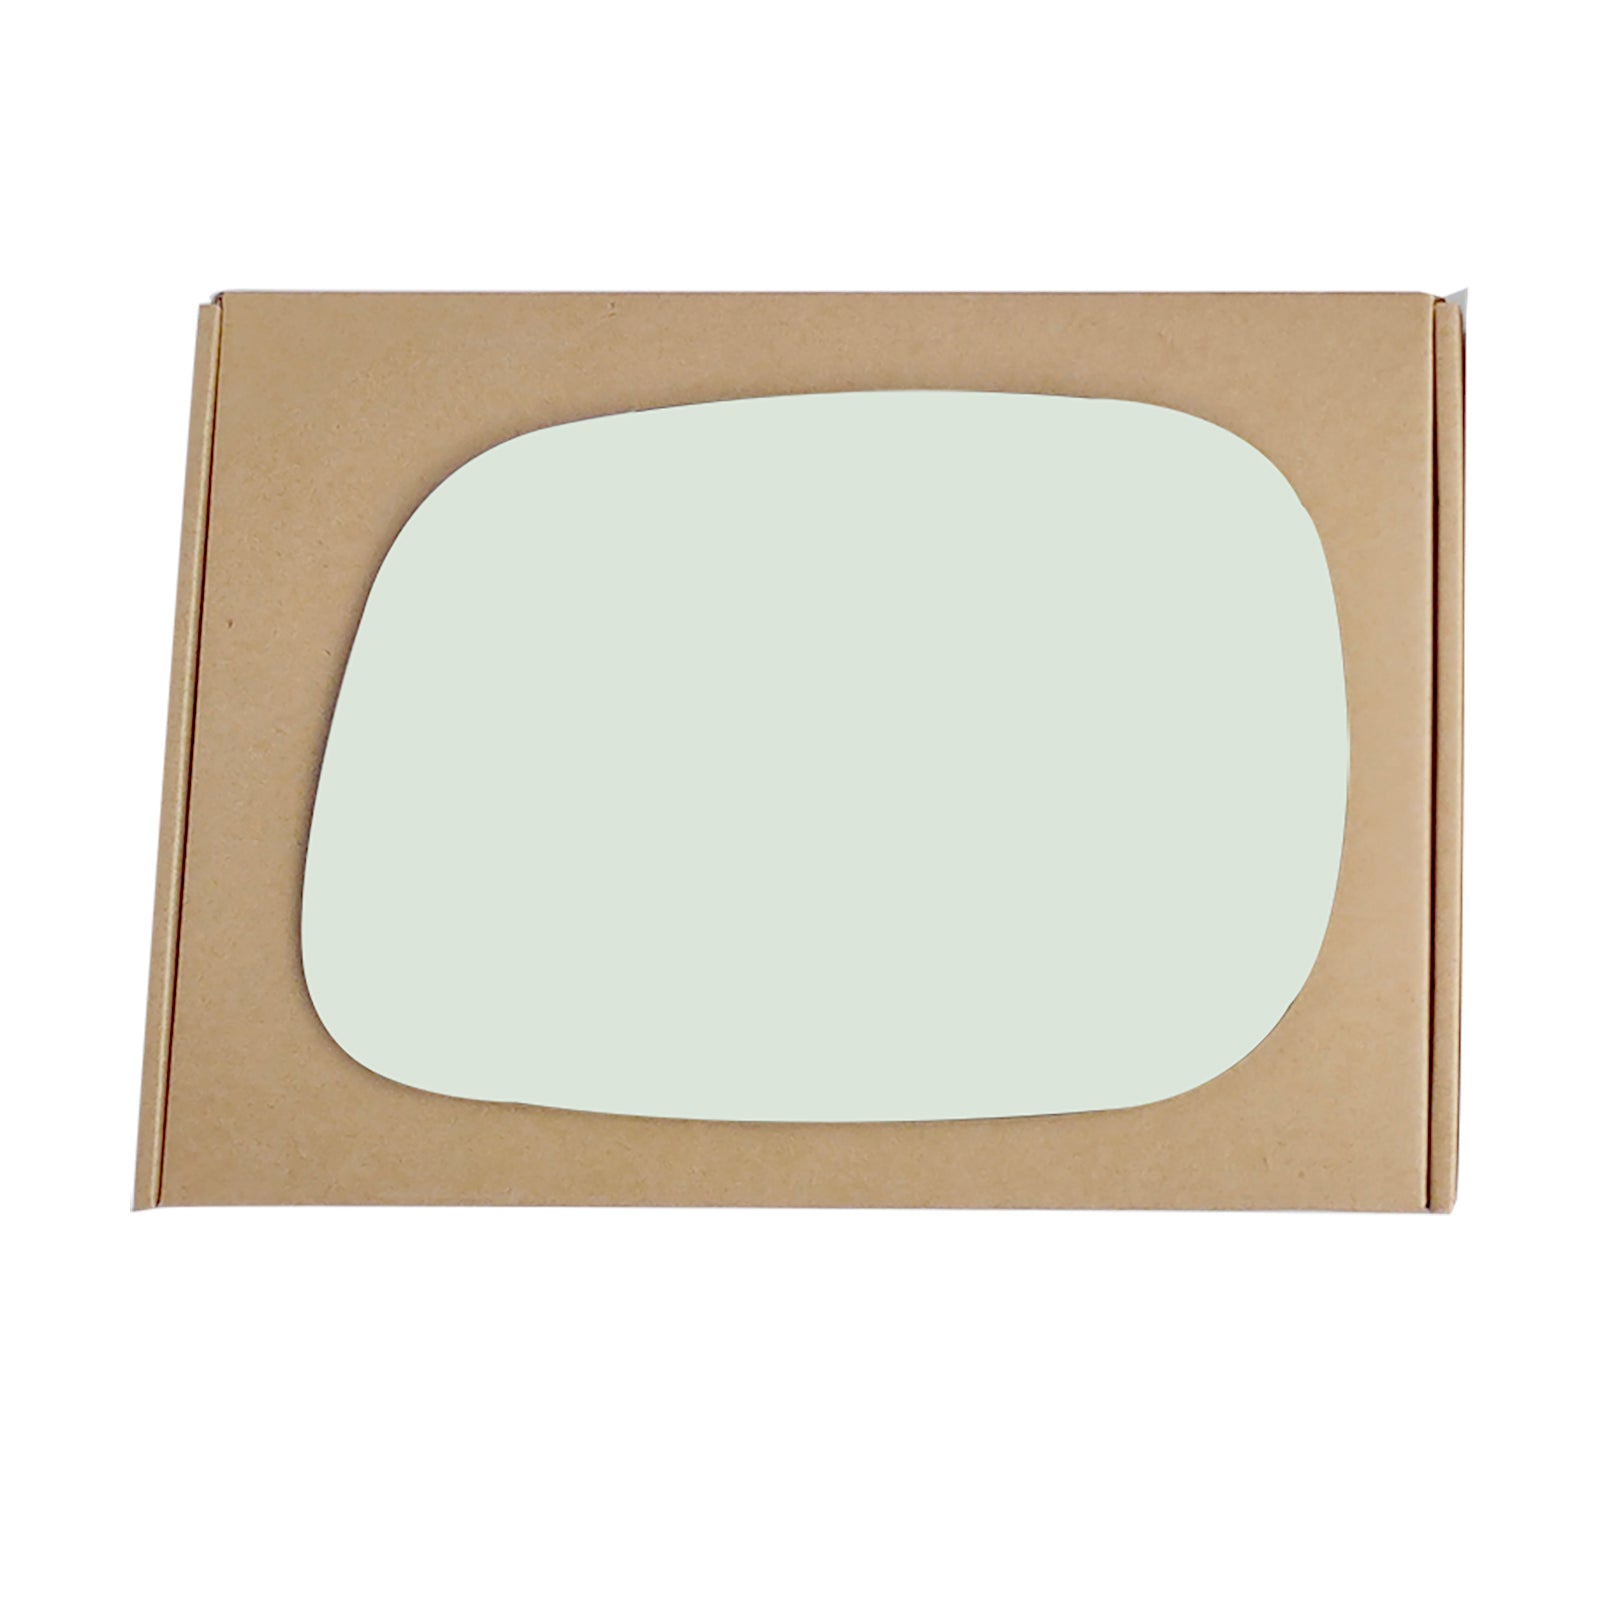 WLLW Replacement Mirror Glass for 2002-2008 Dodge Ram Pickup Full Size, Driver Left Side LH/Passenger Right Side RH/The Both Sides Flat Convex M-0003